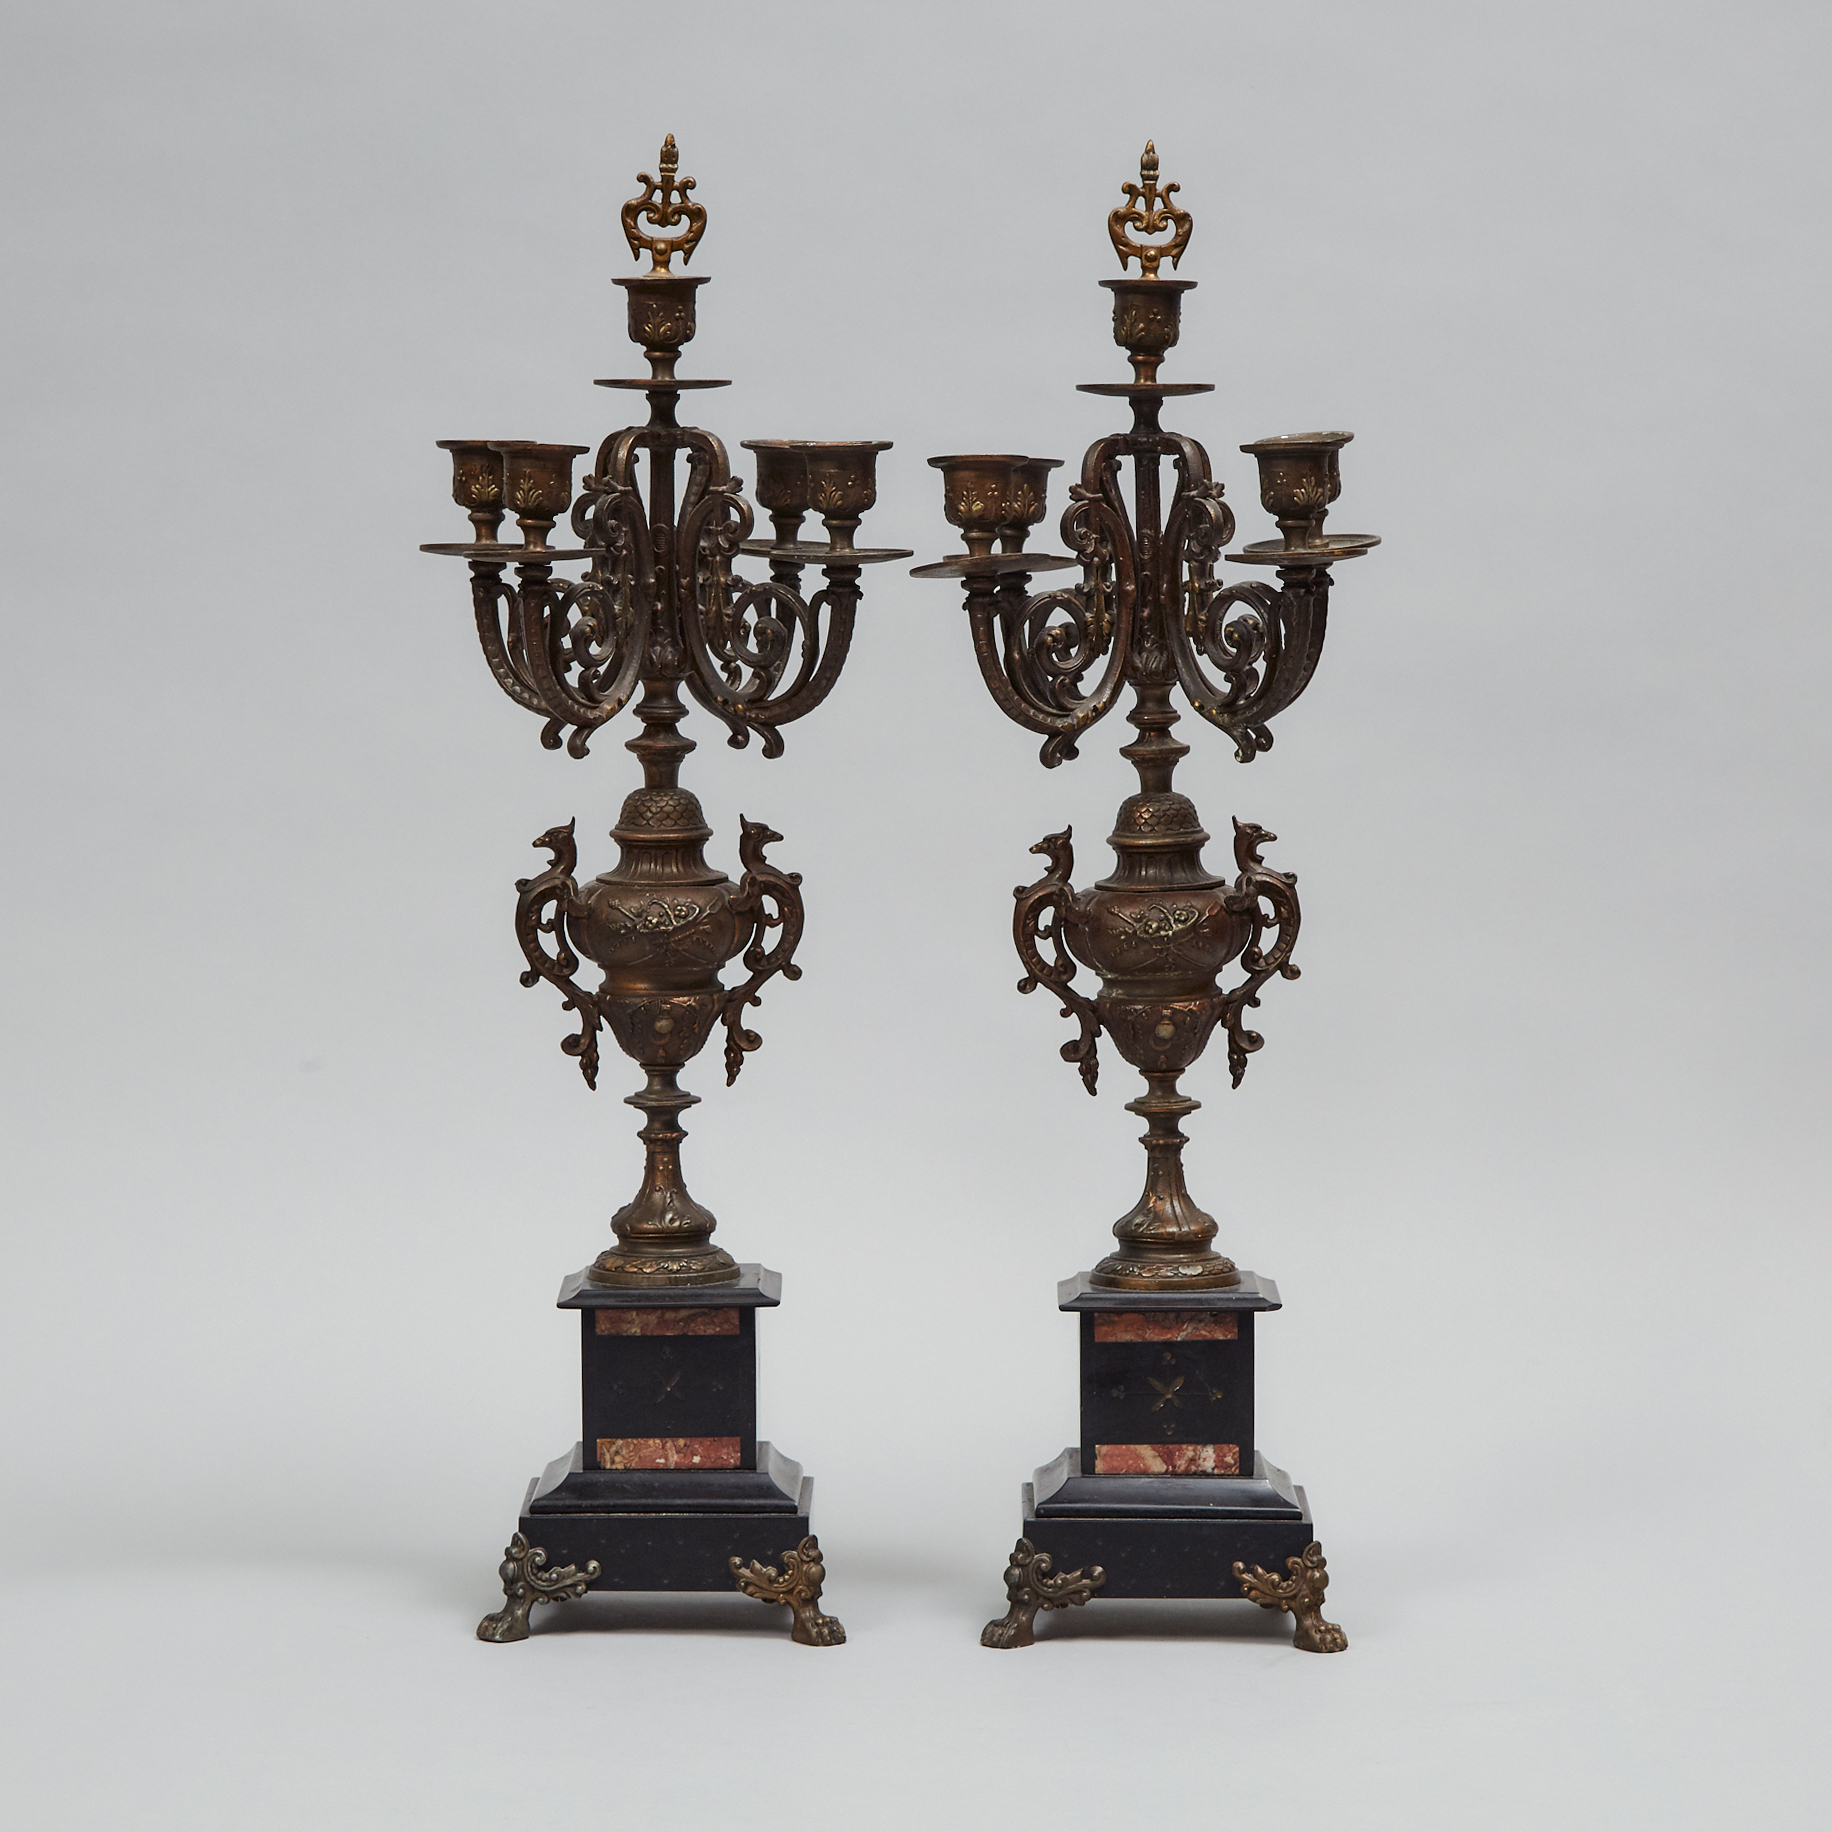 Pair of French Aesthetic Movement Black Belgian Marble and Gilt Metal Mantle Candelabra, c.1880